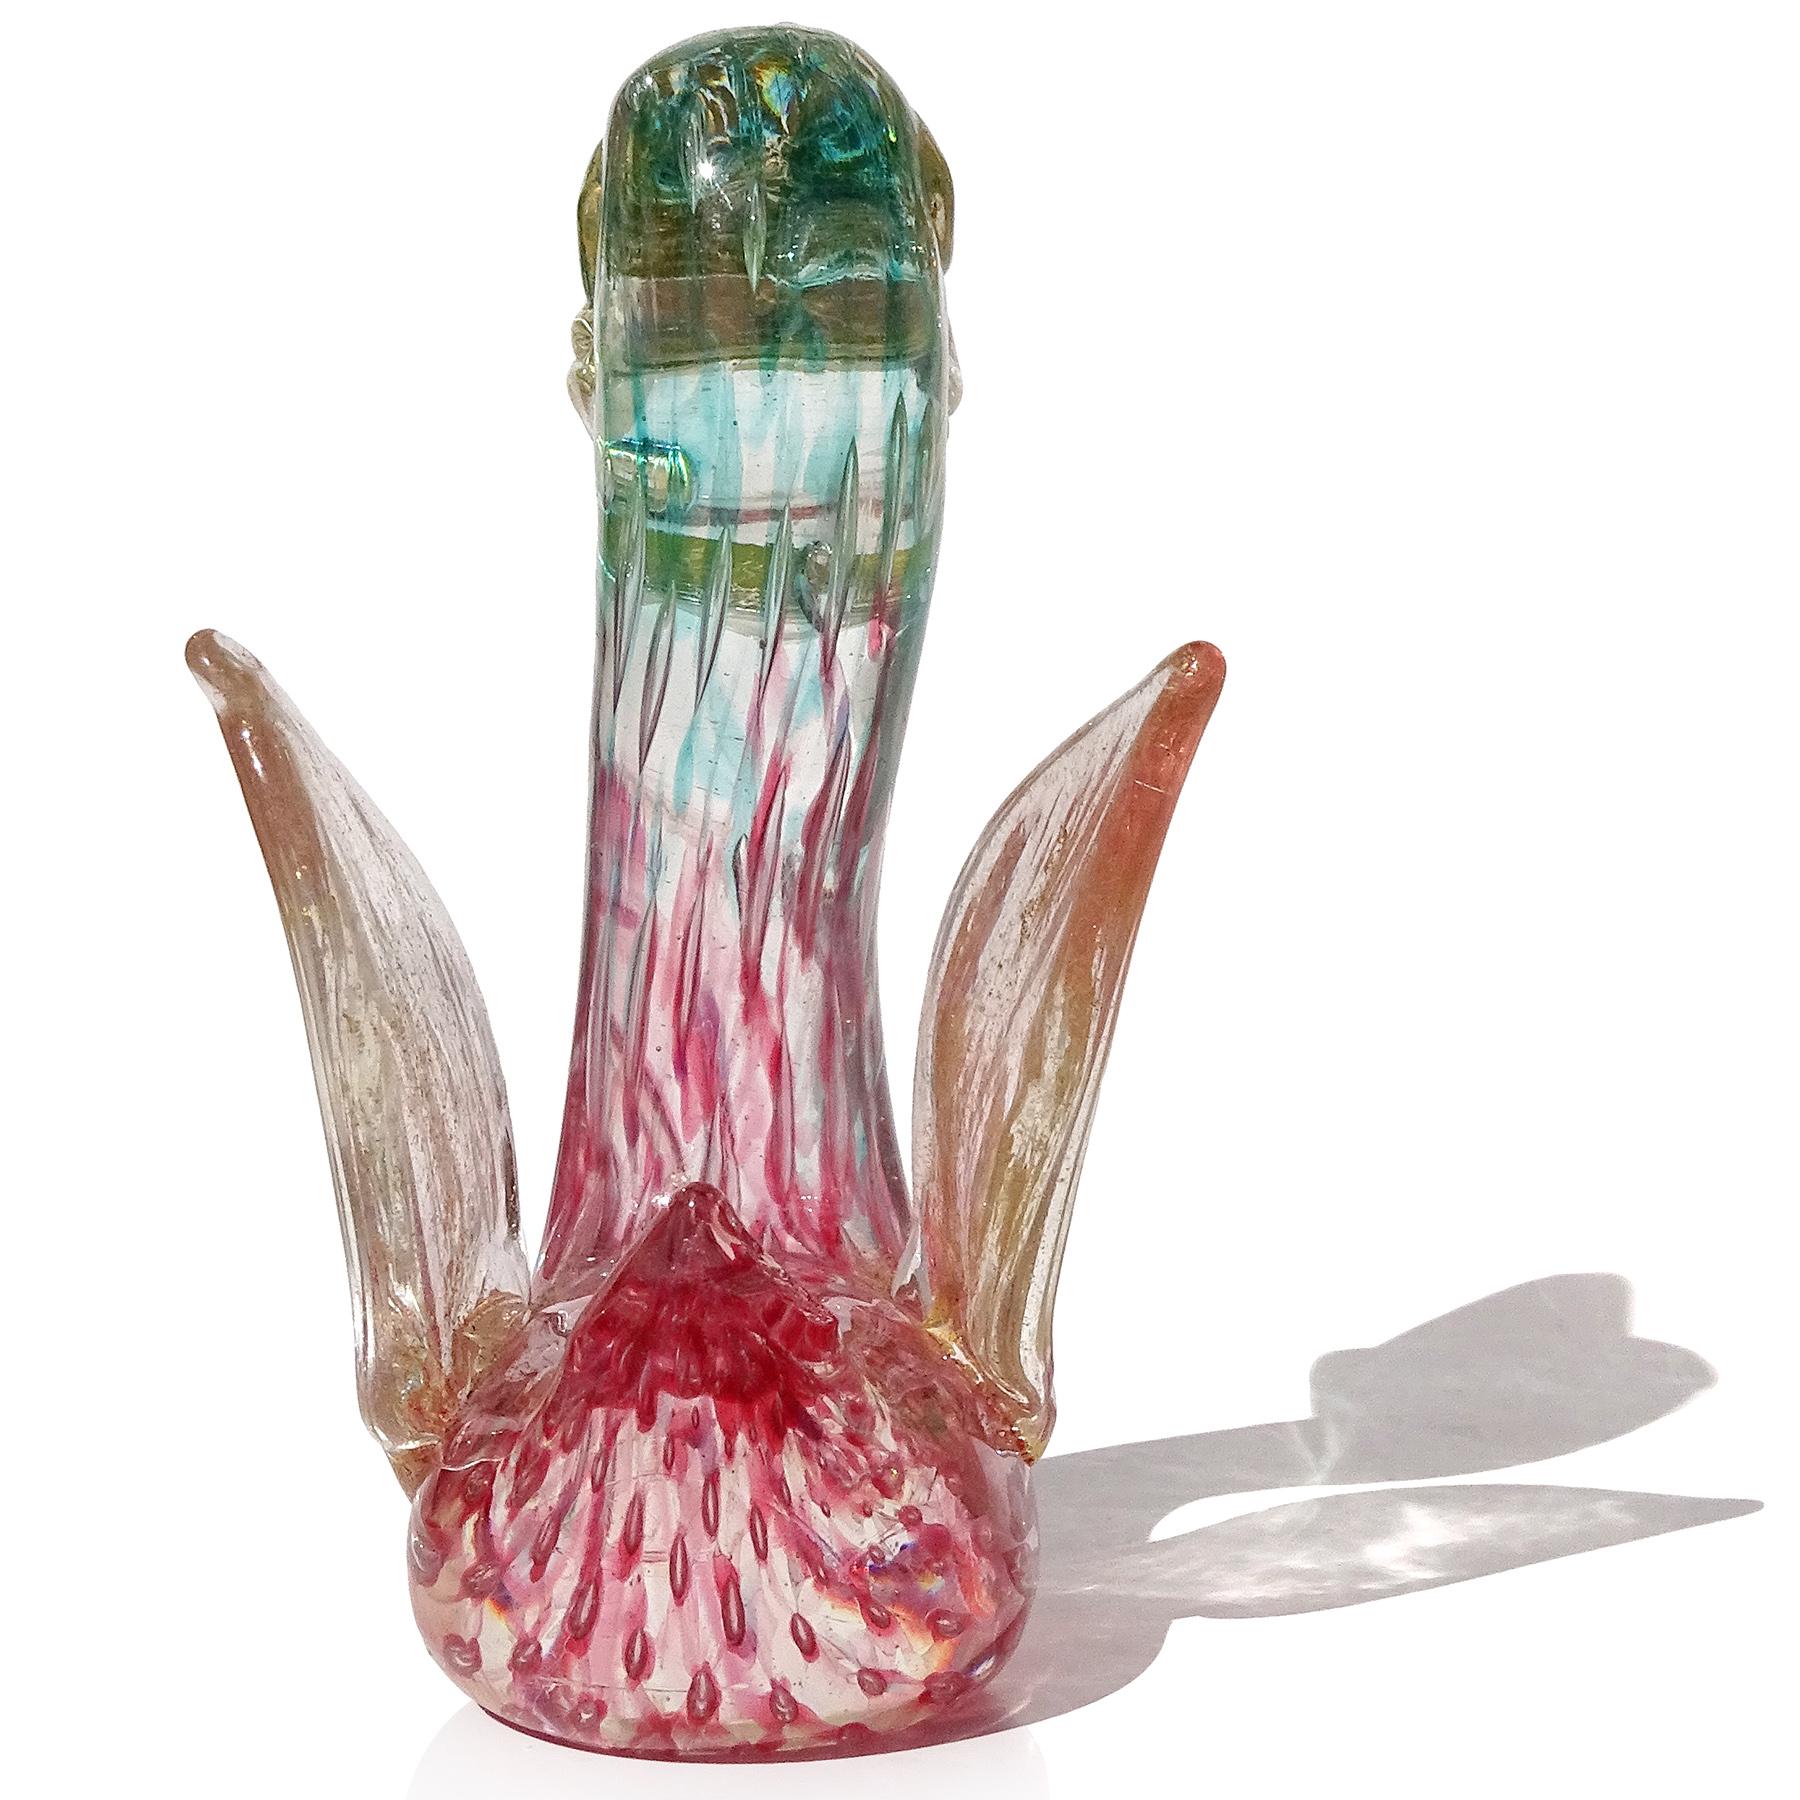 Barovier Toso Murano Teal Pink Gold Flecks Italian Art Glass Bird Figurine In Good Condition For Sale In Kissimmee, FL